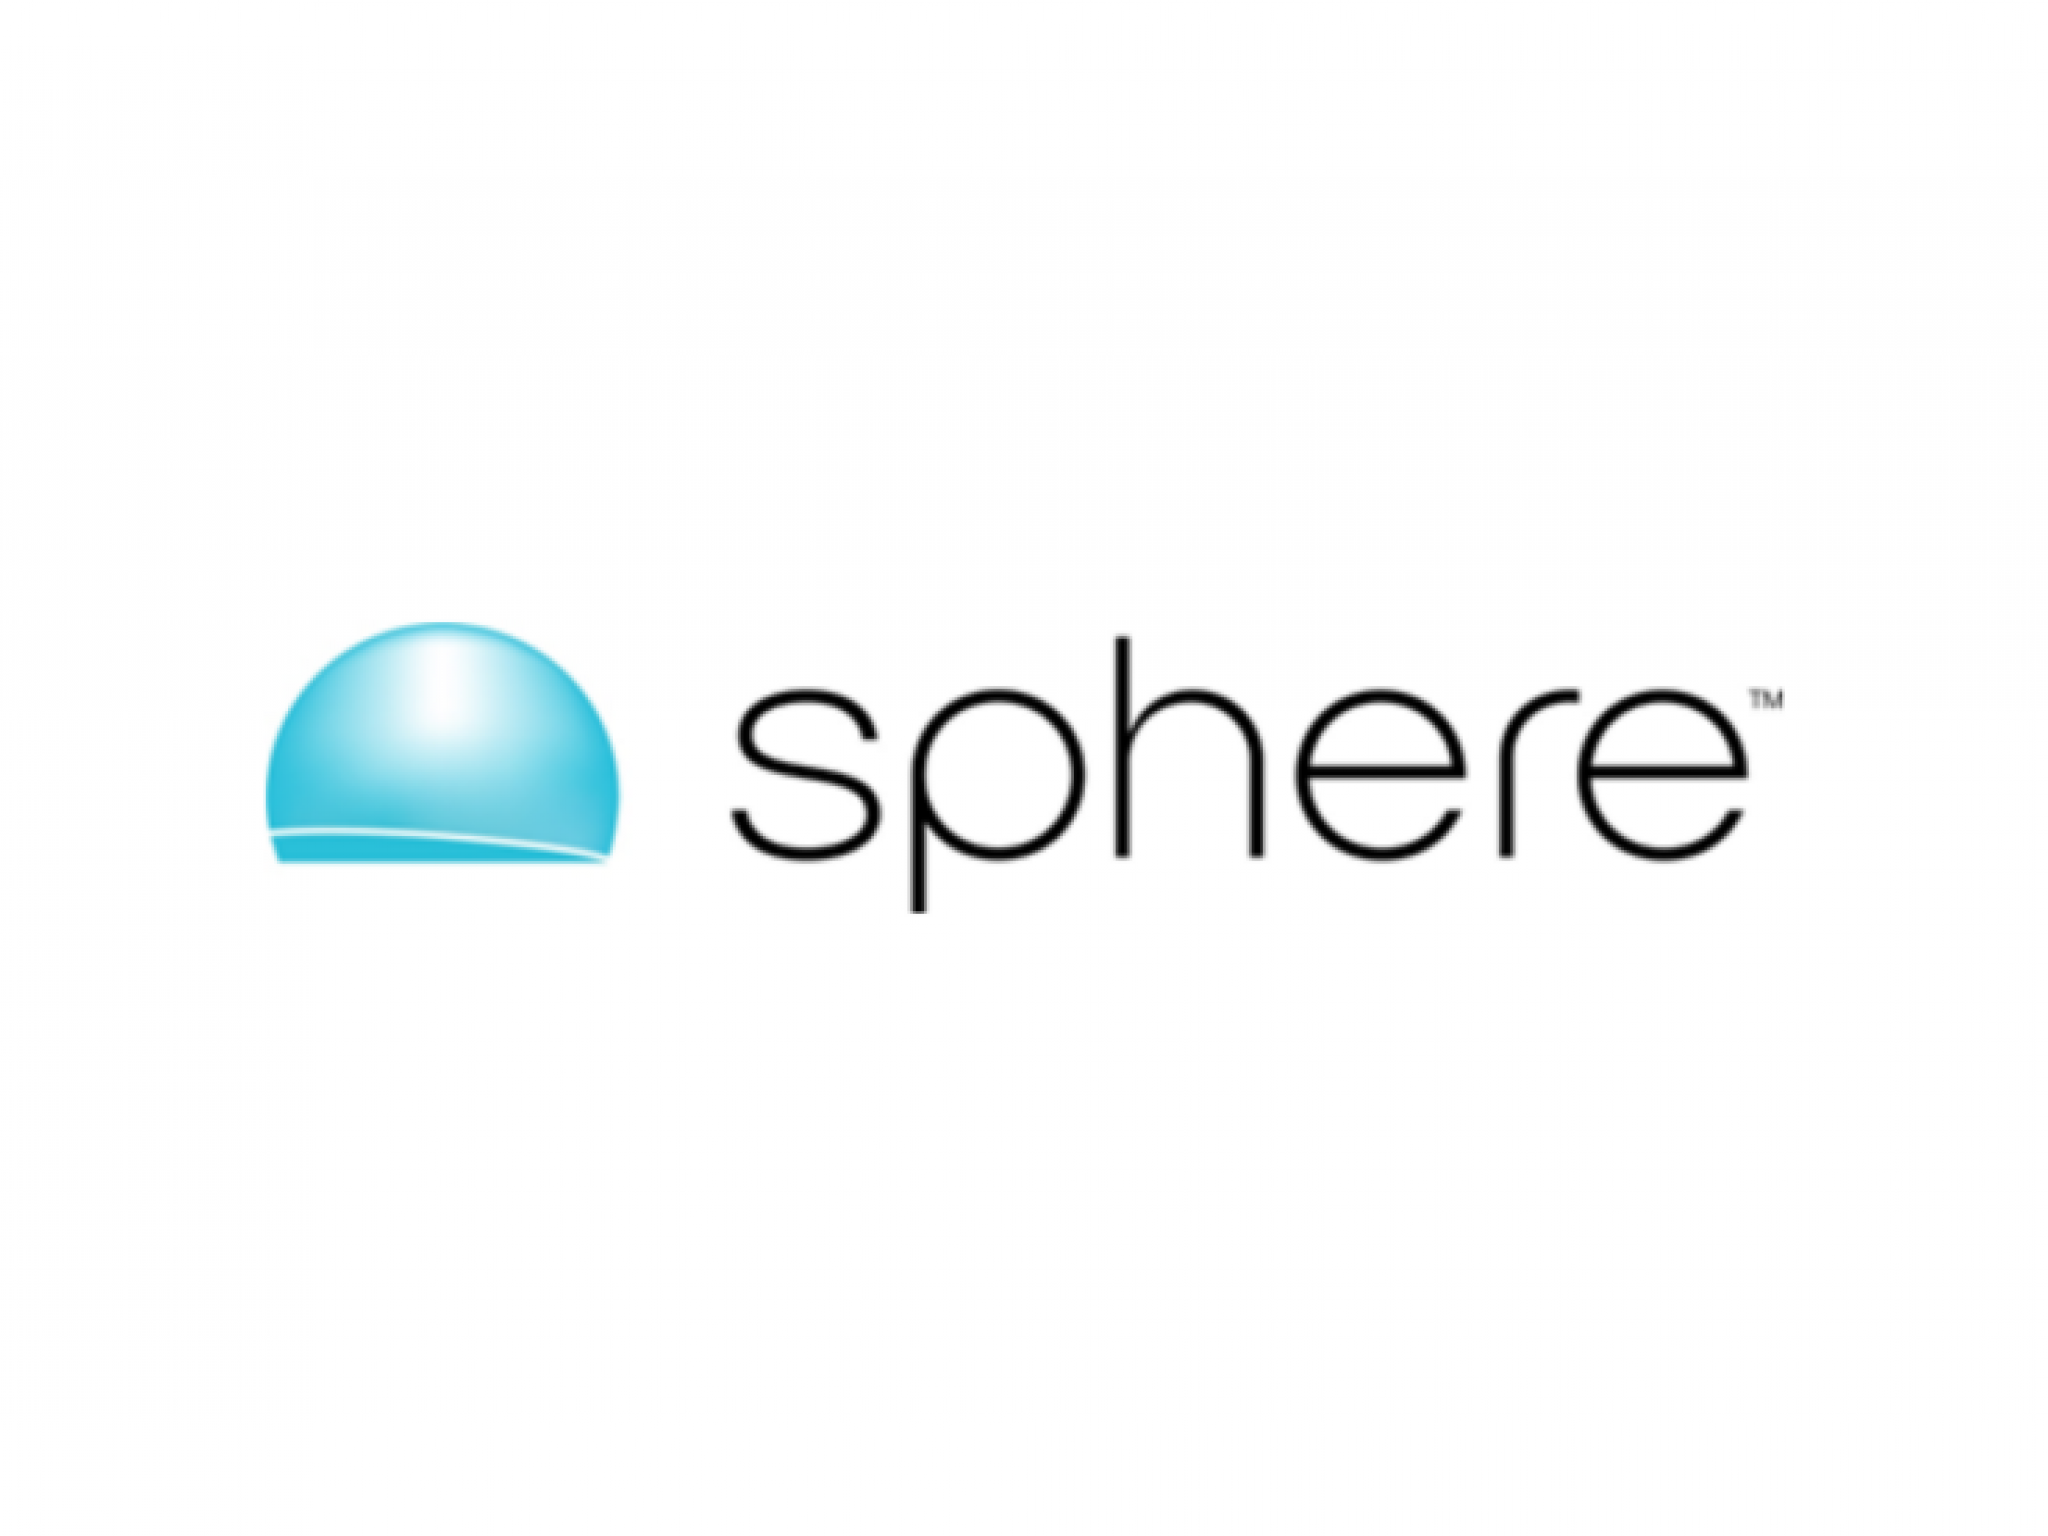  sphere-entertainments-wild-ride-q3-sales-soar-yet-fall-short-of-expectations 